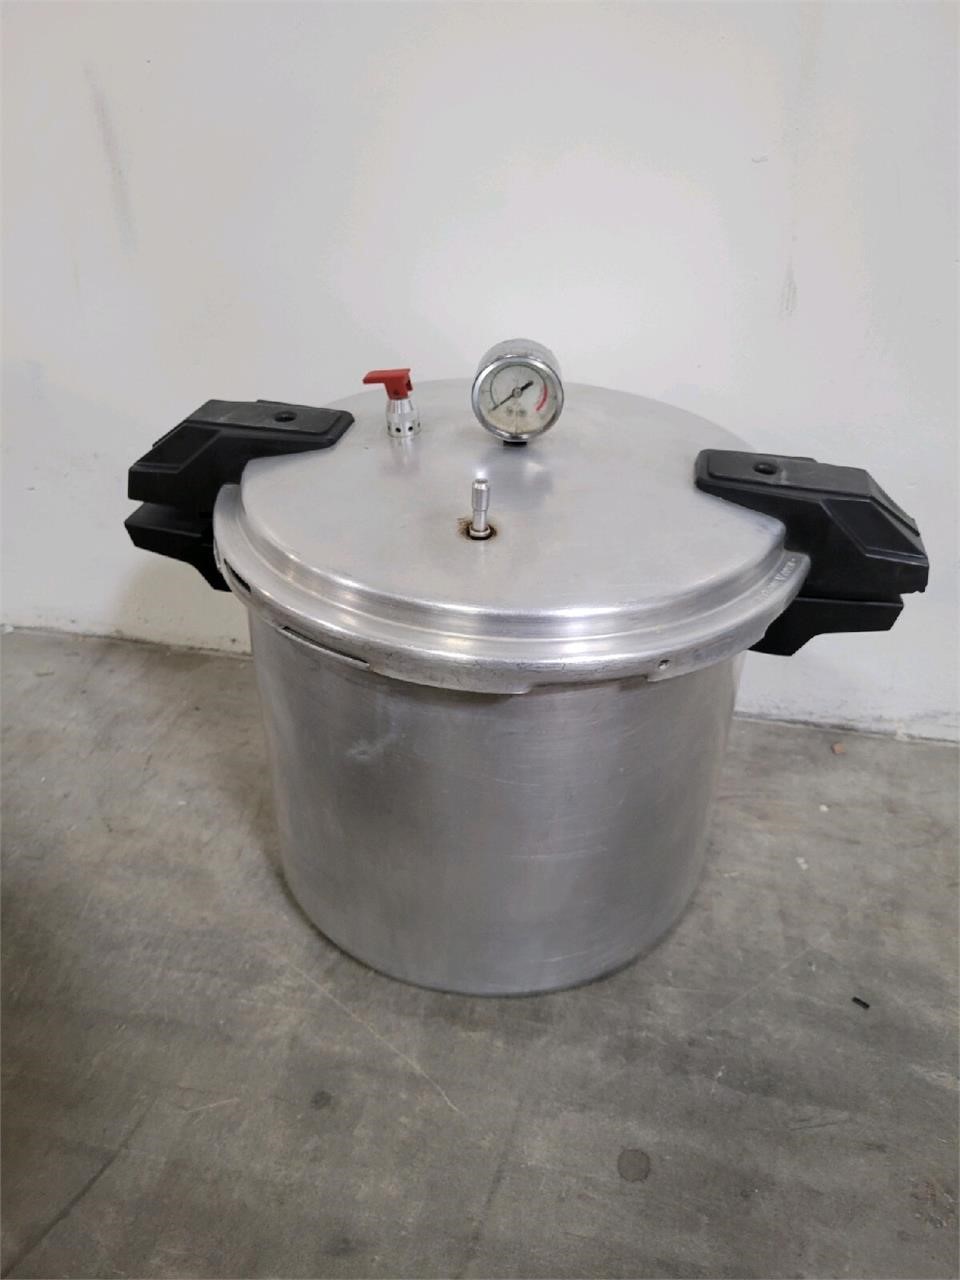 Pressure Cooker and Canner